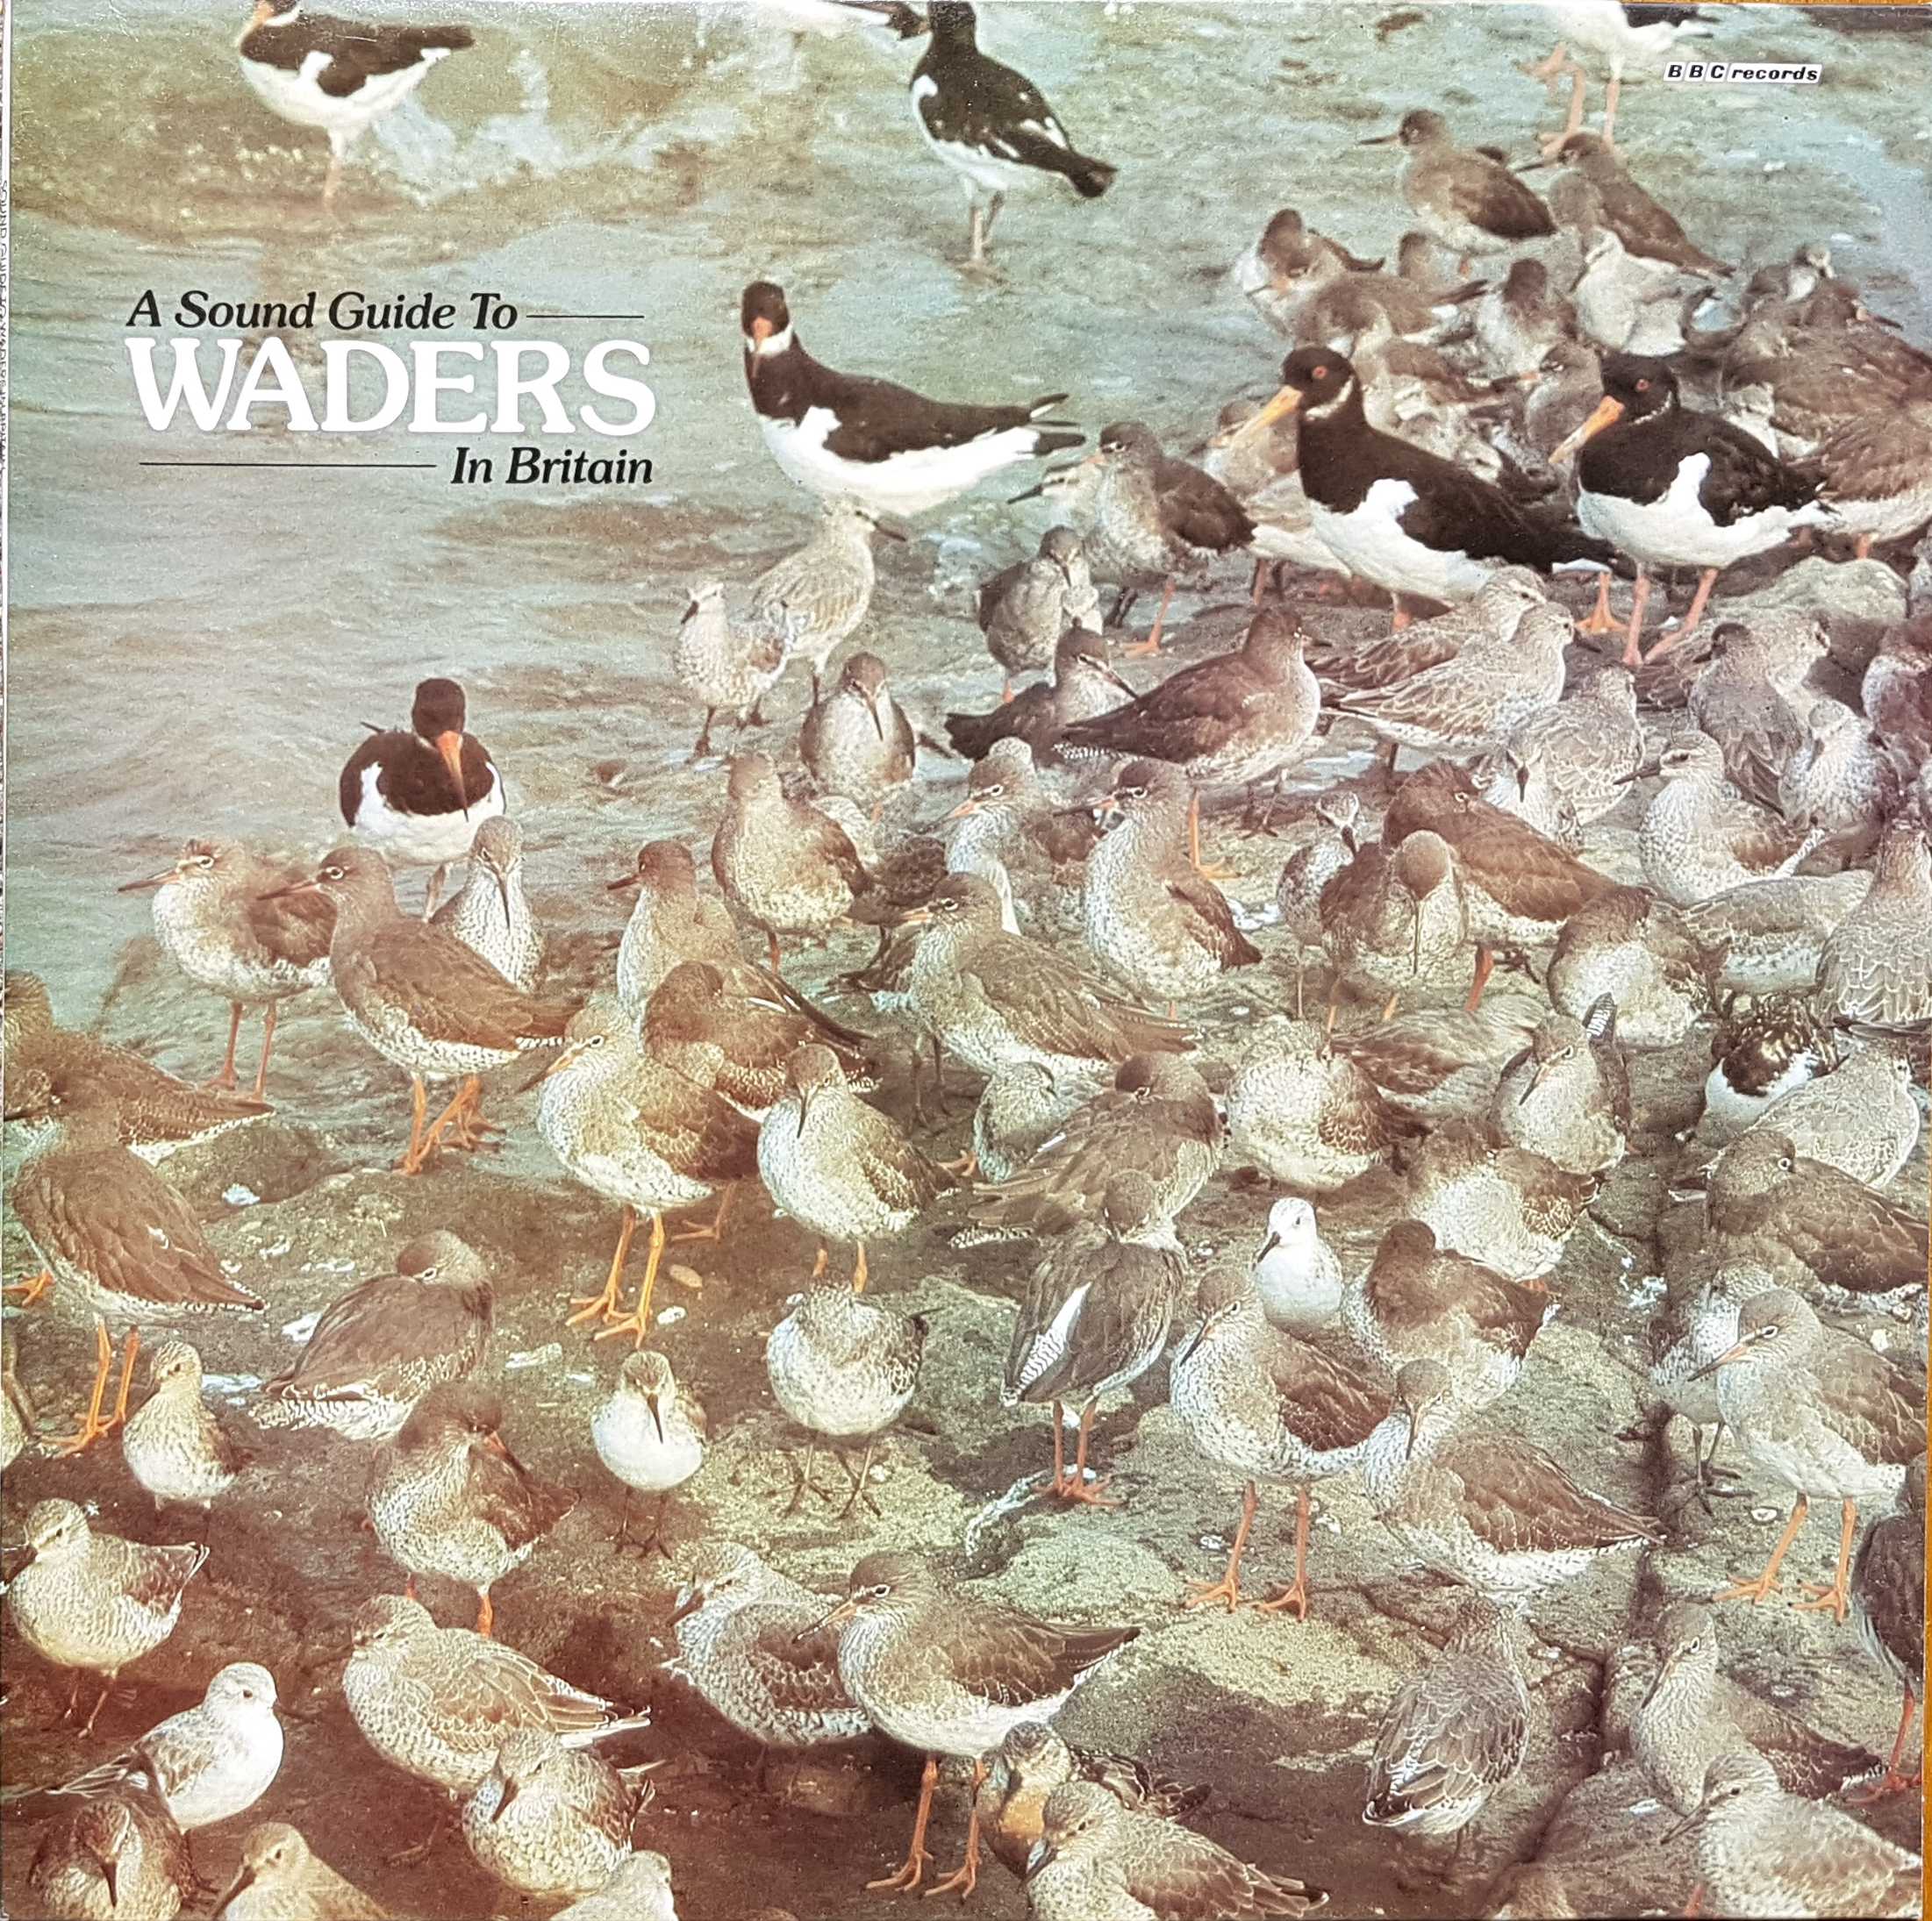 Picture of REC 545 Sound guide to Waders in Britain by artist Various from the BBC albums - Records and Tapes library